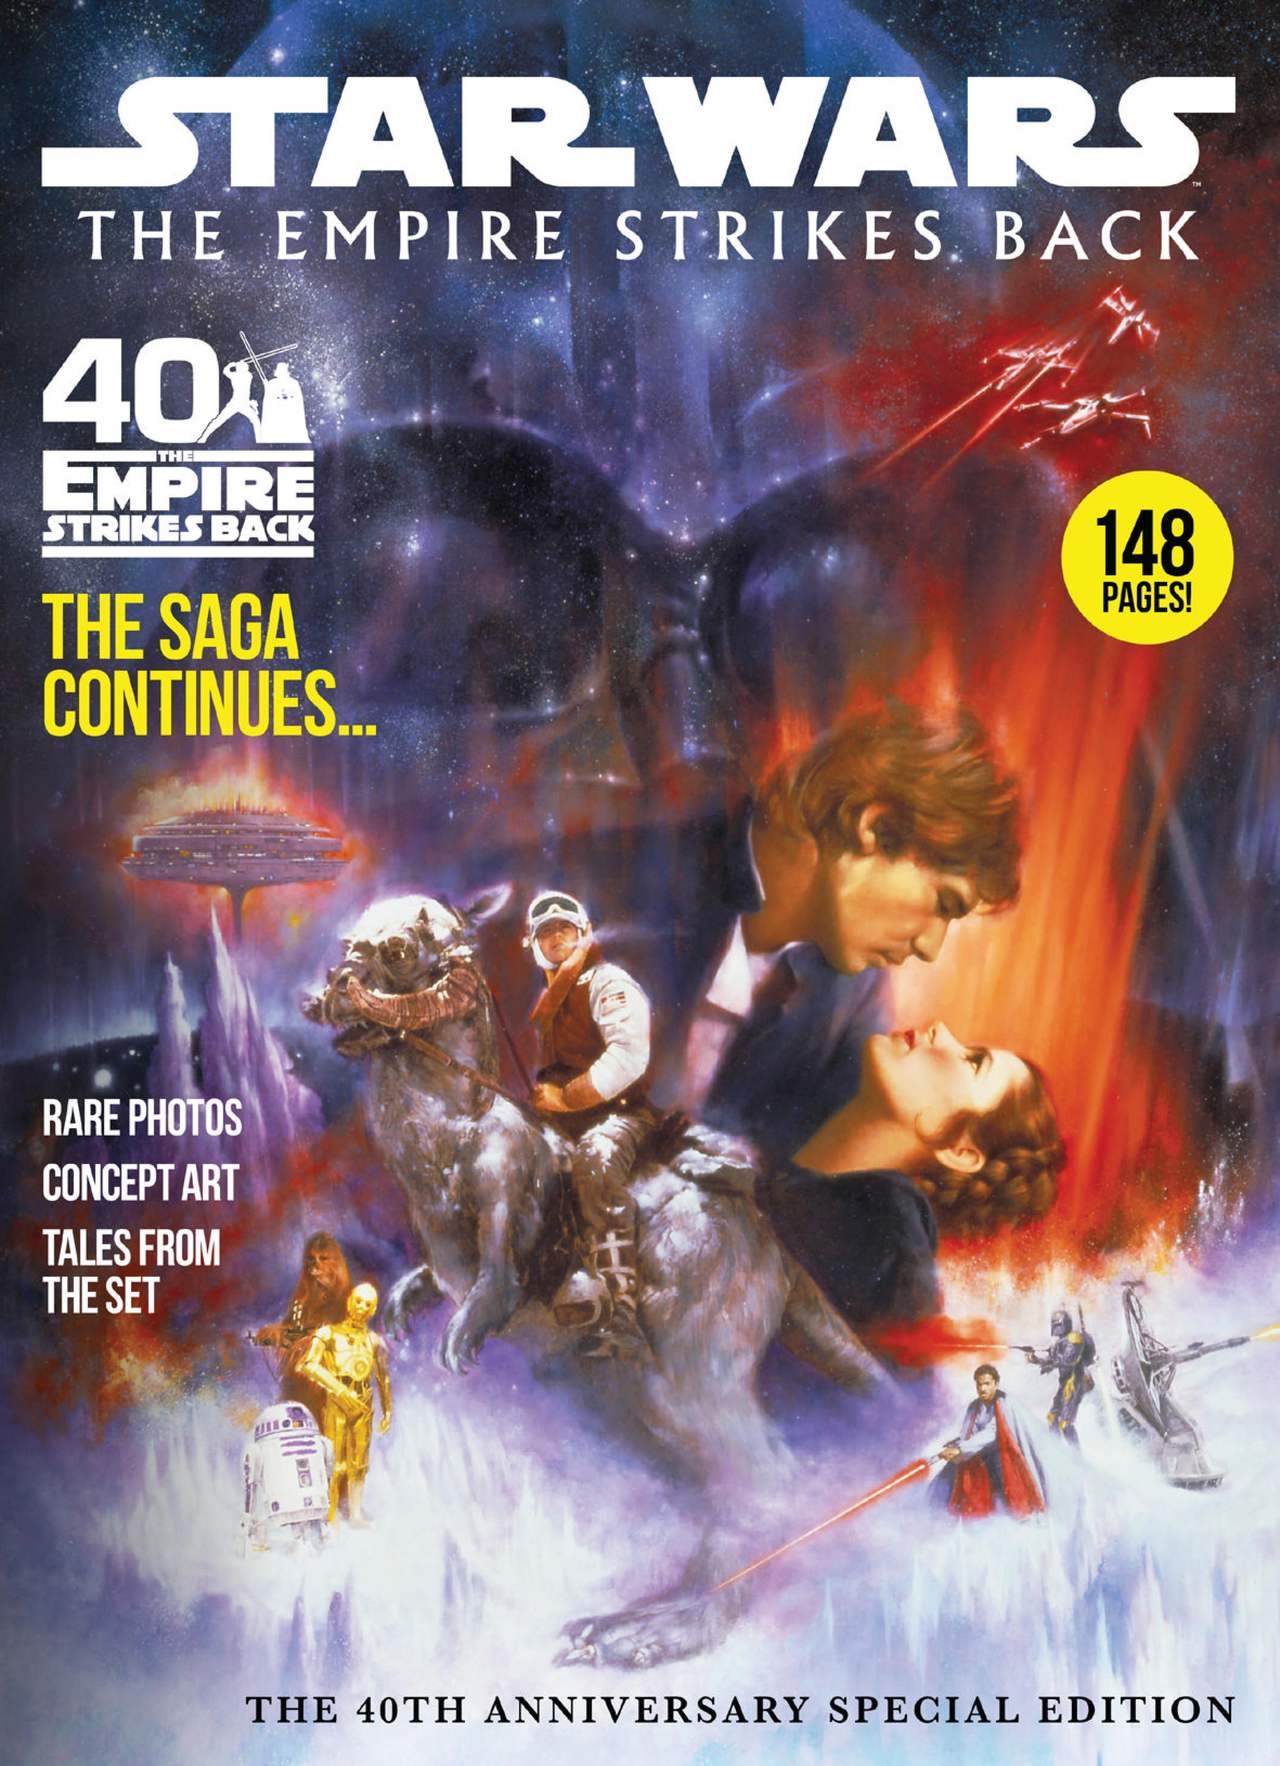 Star Wars - The Empire Strikes Back - The 40th Anniversary Special Edition 0